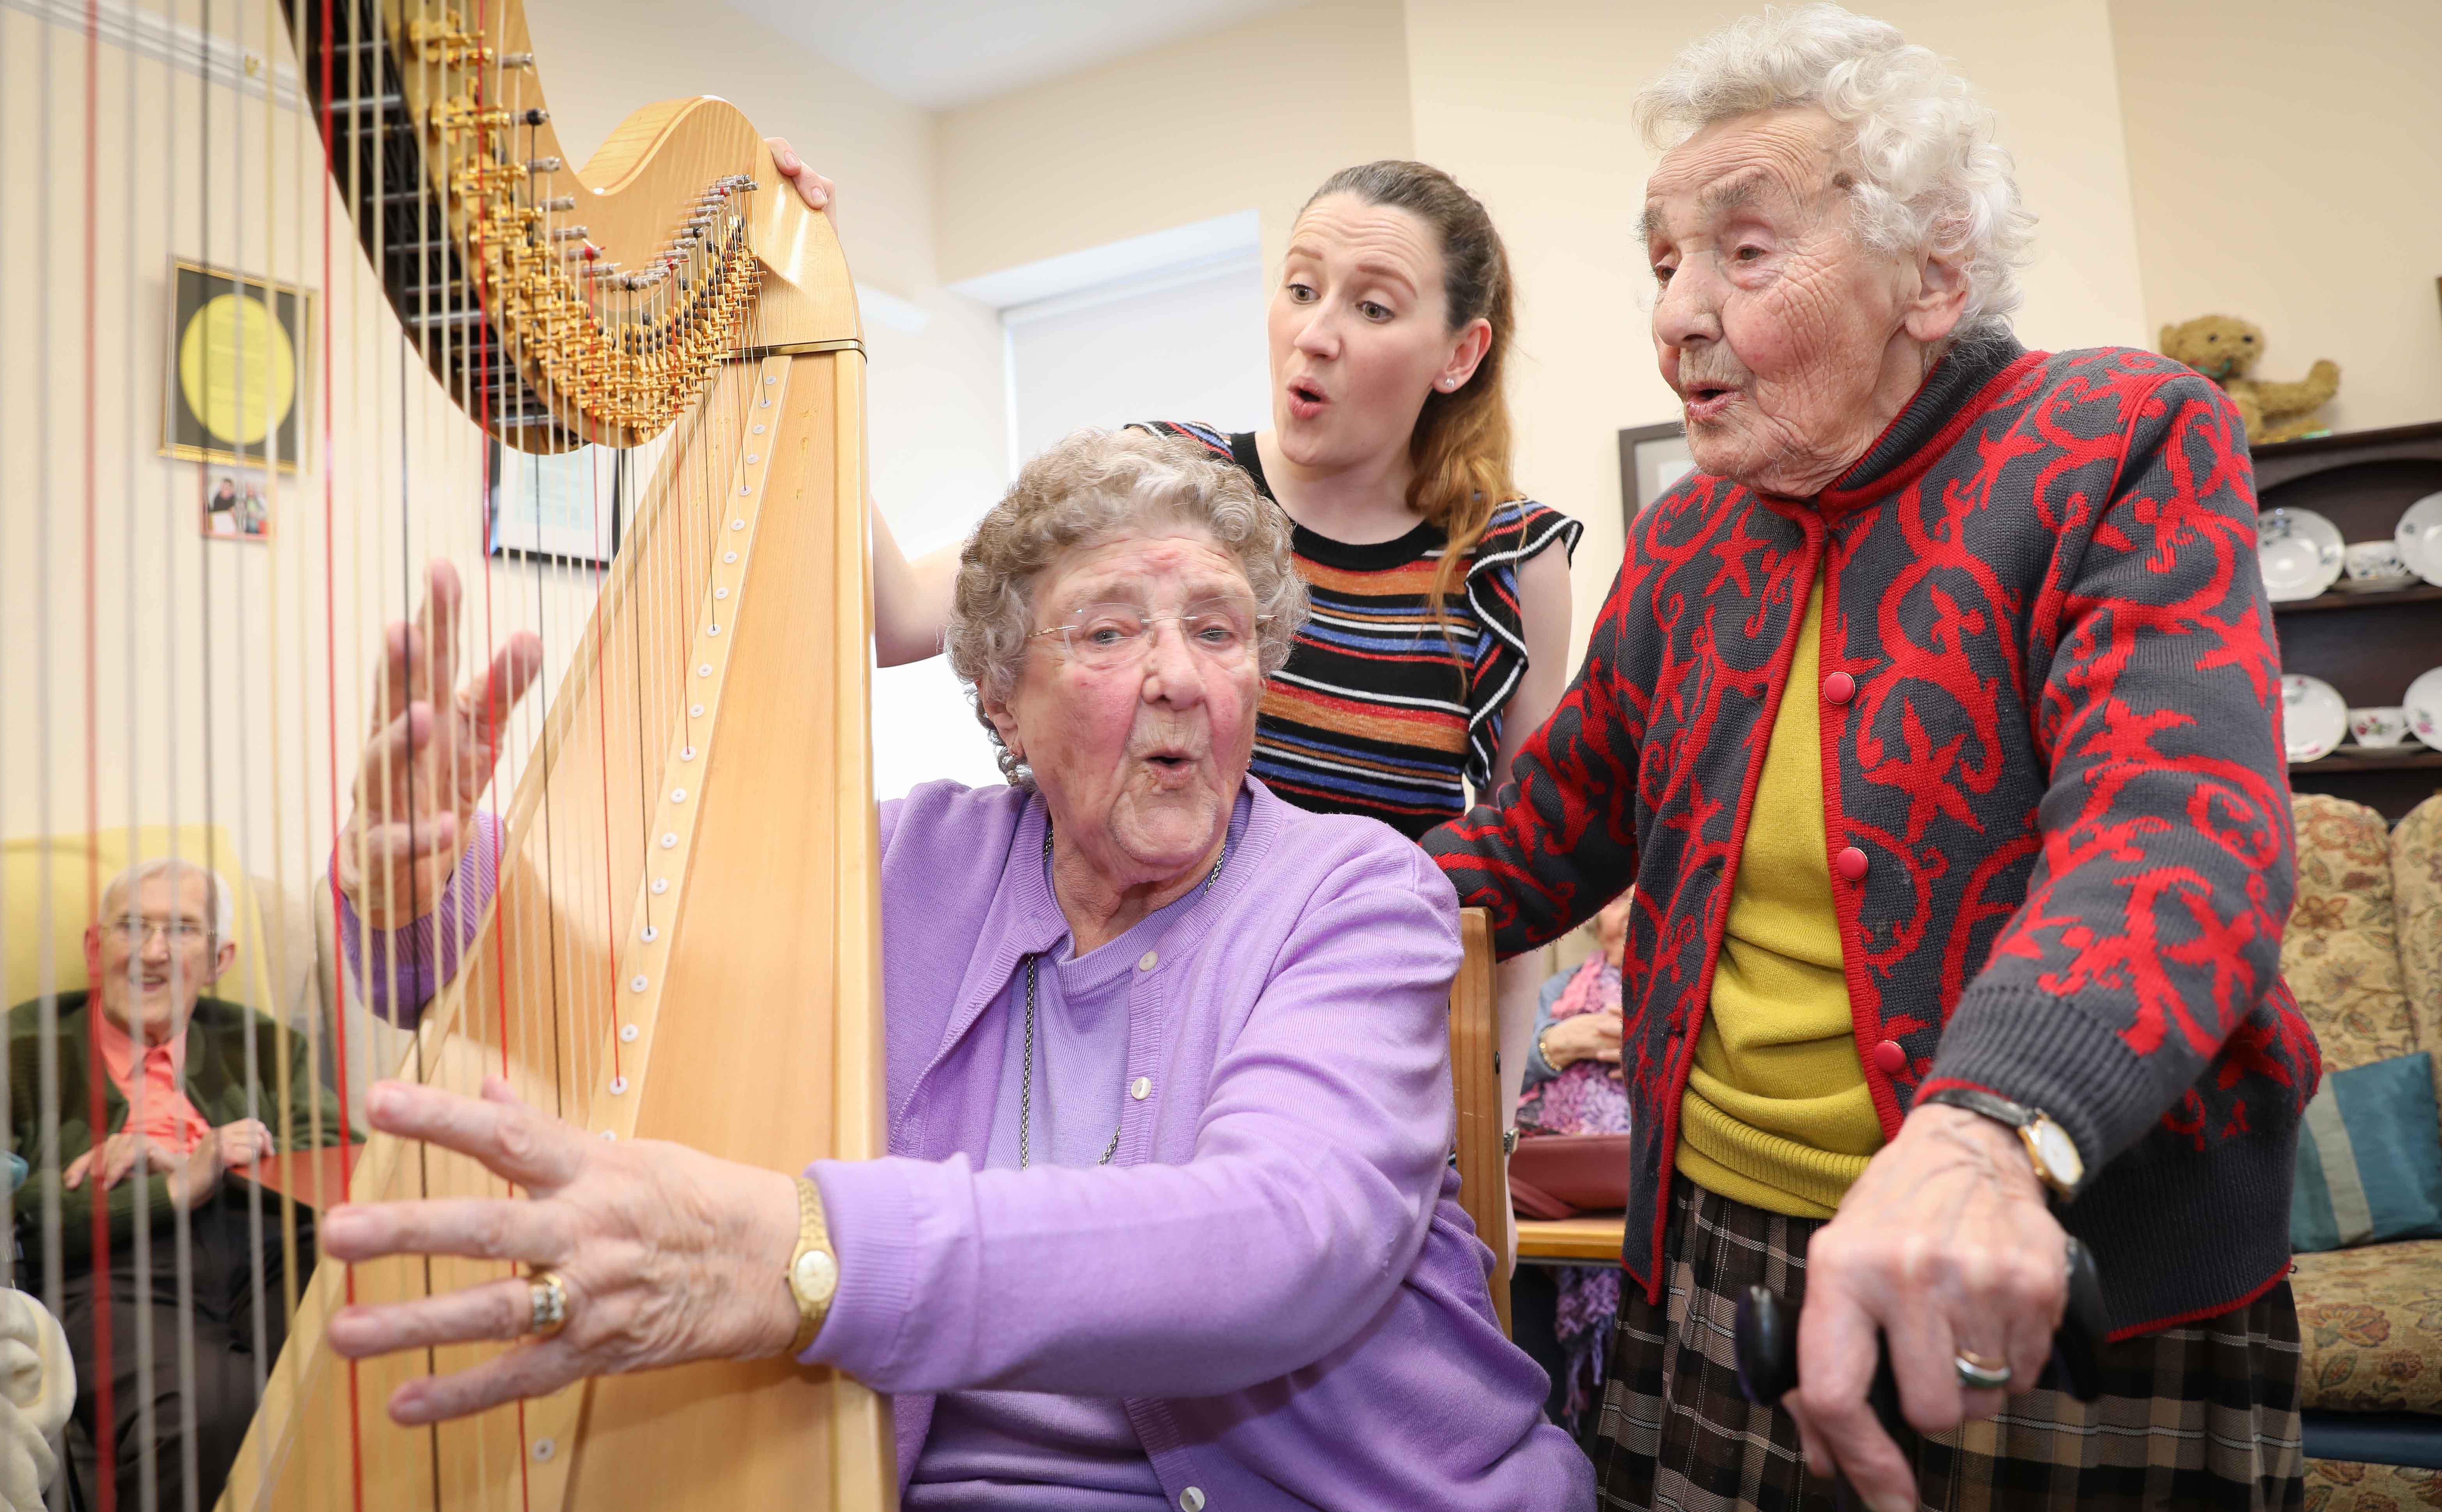 Dynamic duo aged 92 on song with renowned harpist Elfair